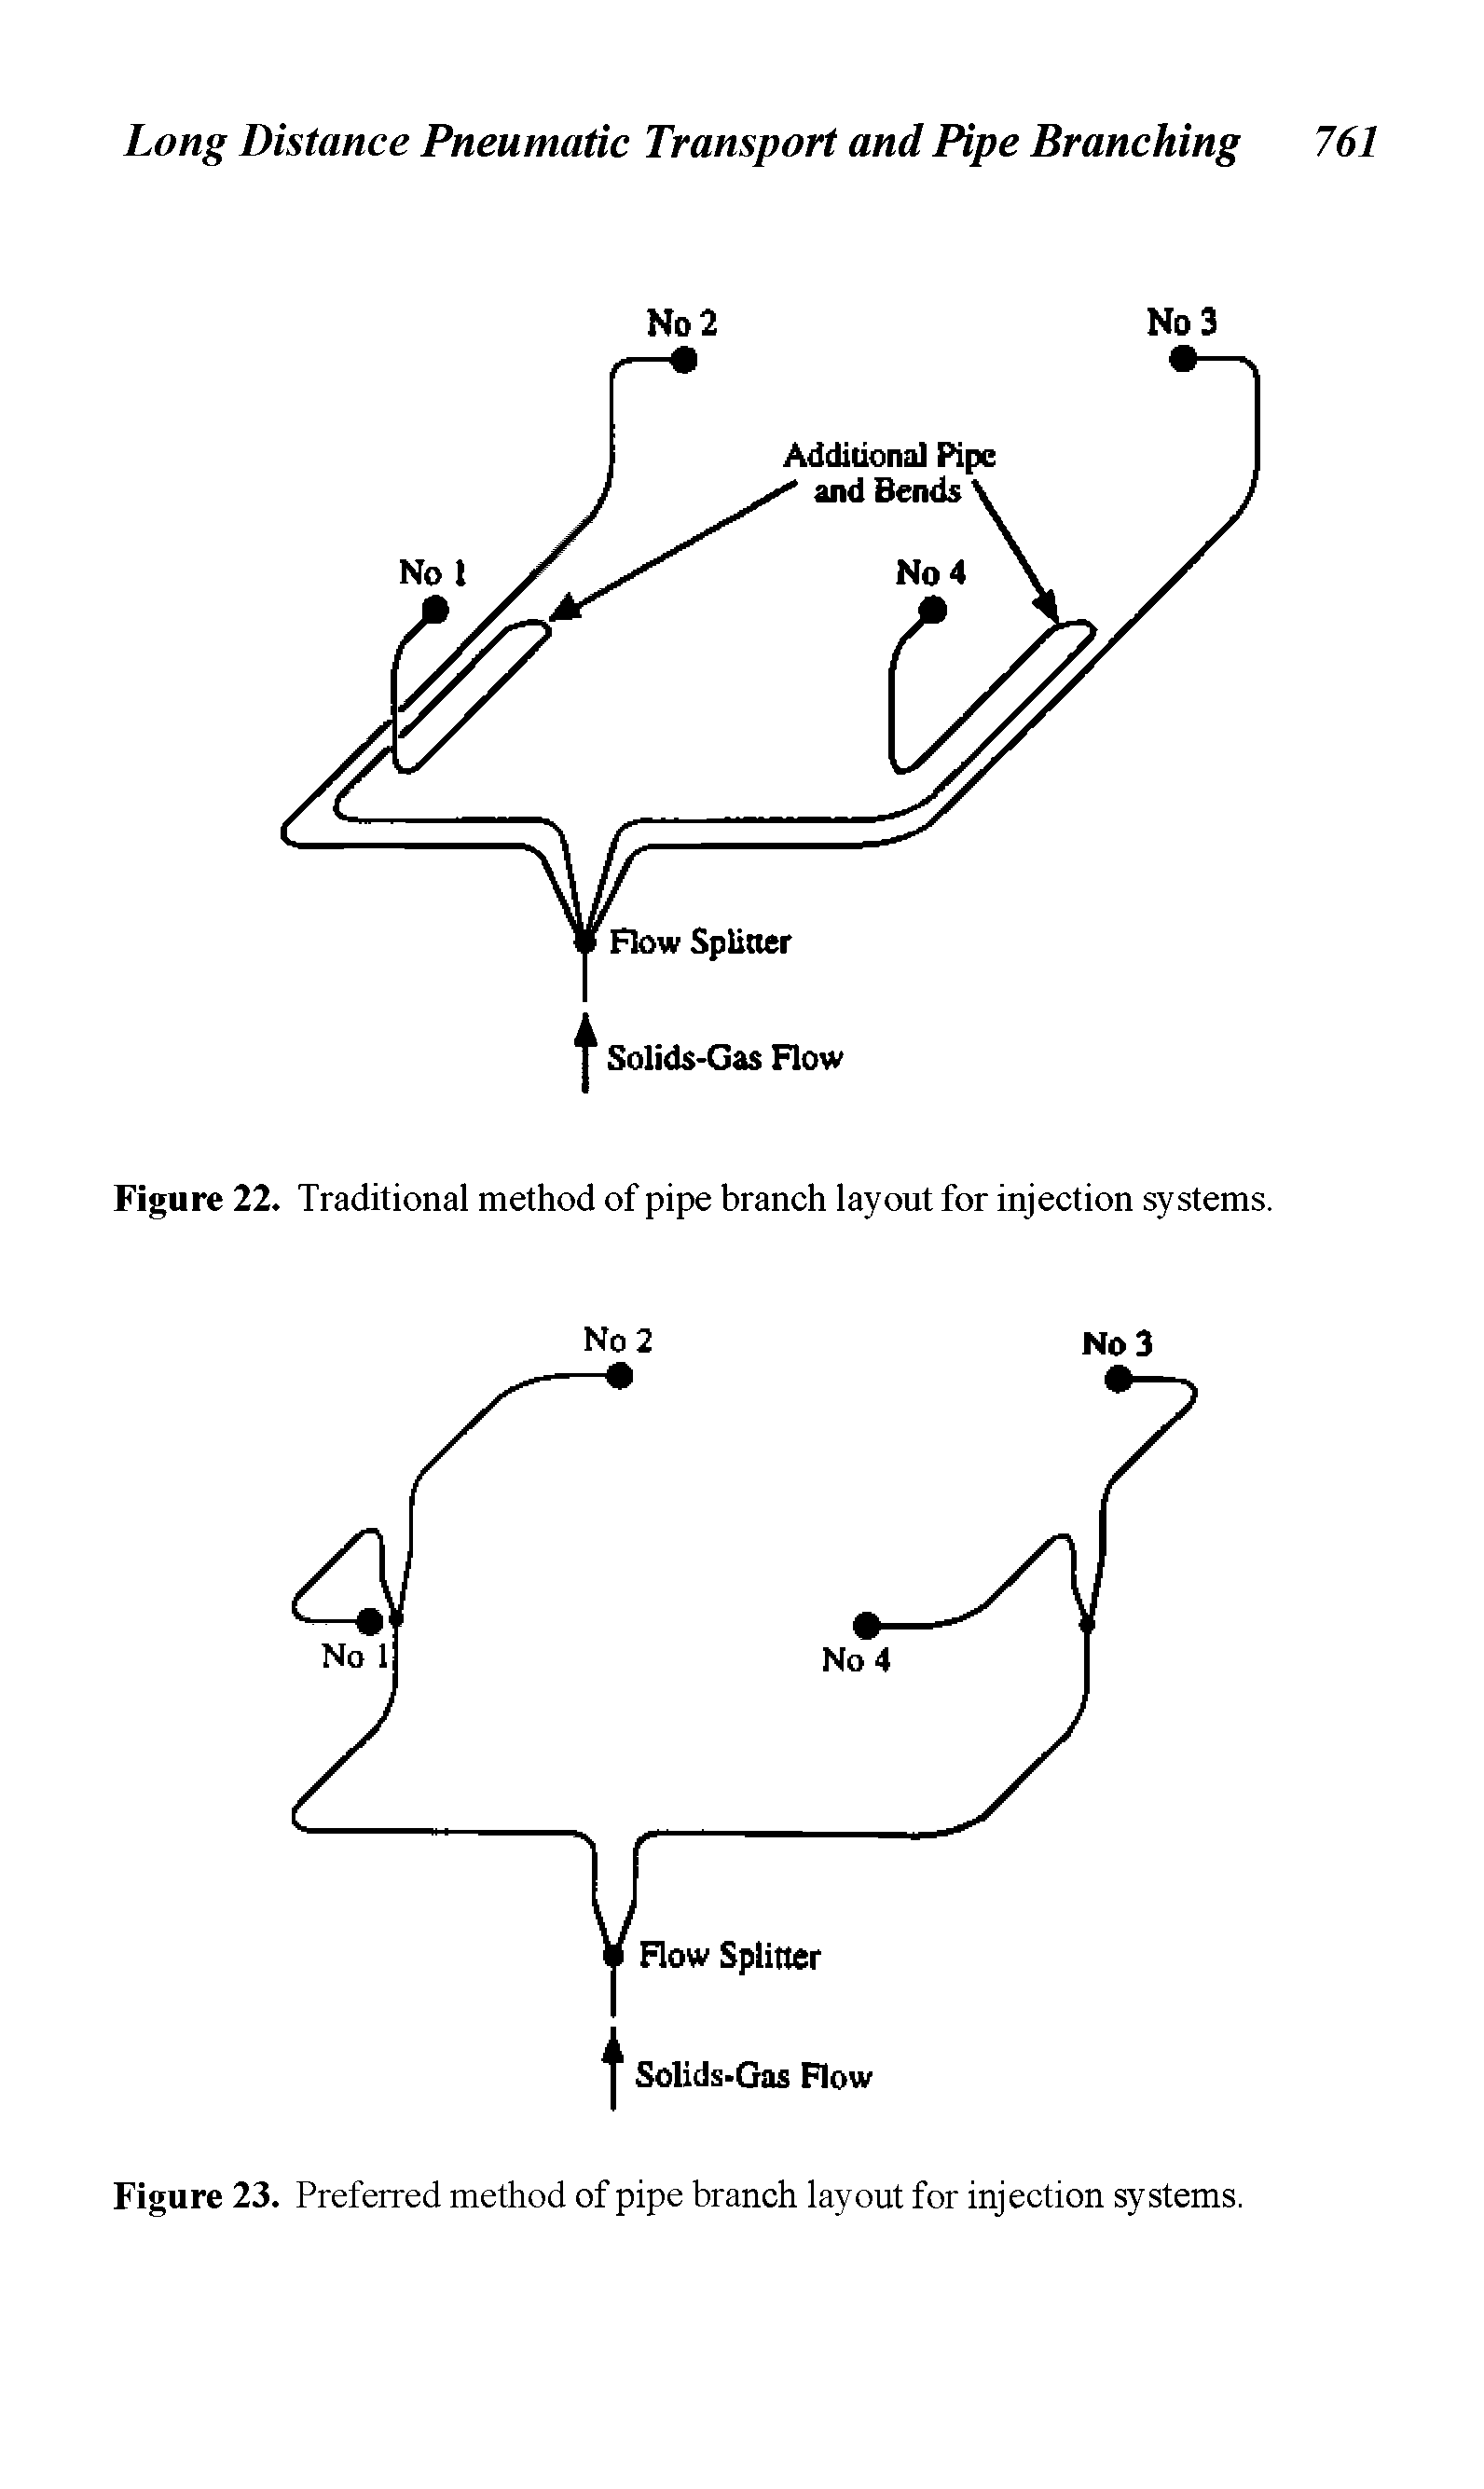 Figure 22. Traditional method of pipe branch layout for injection systems.